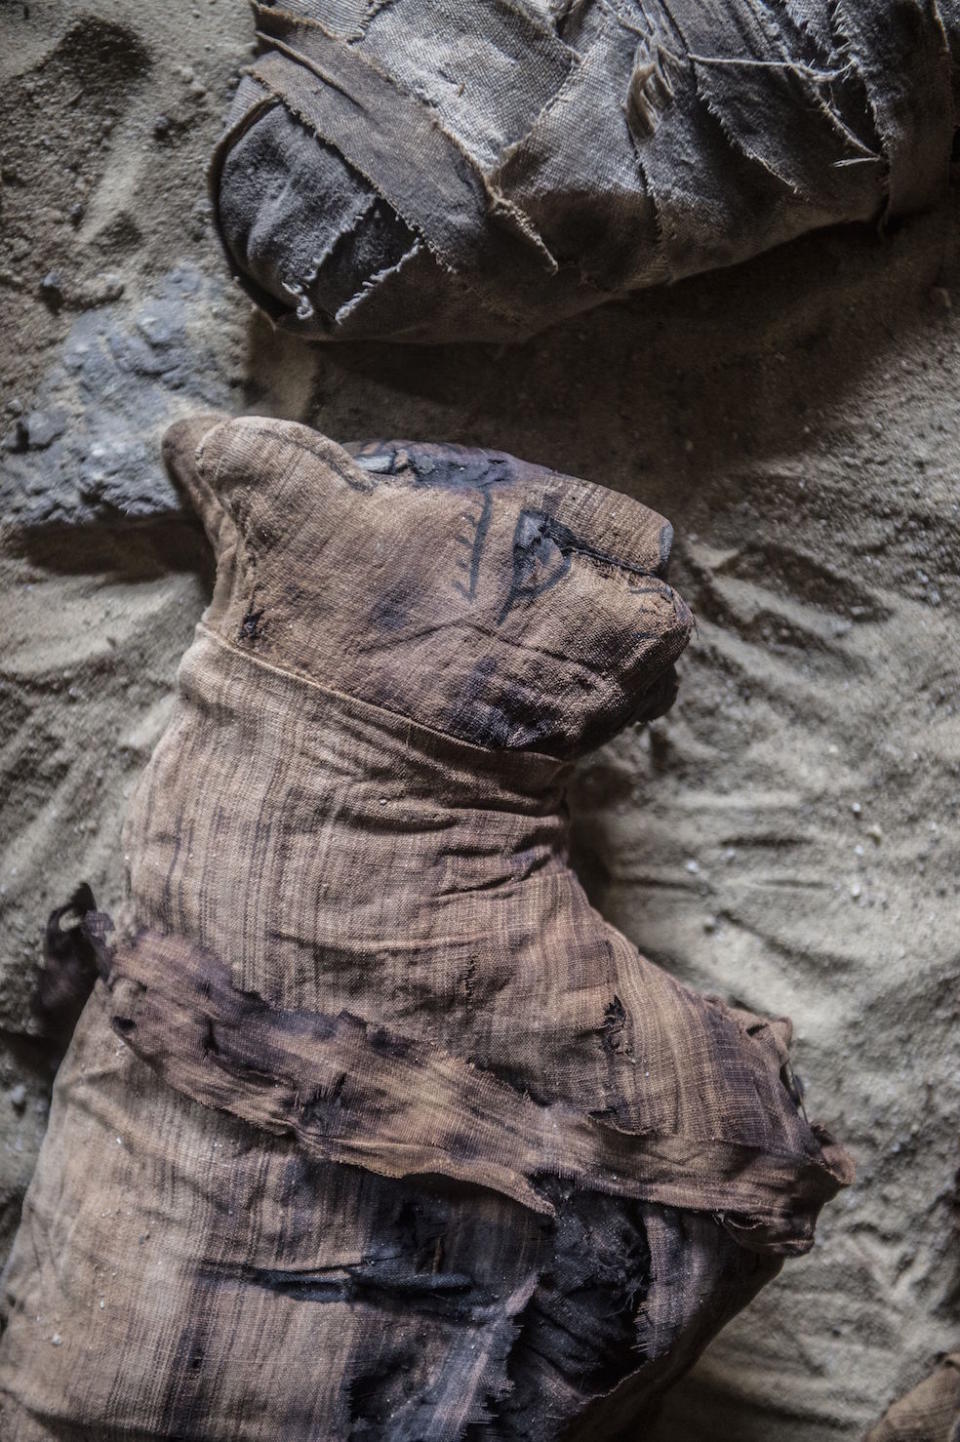 Mummified cats are seen during the demonstration of a new discovery made by an Egyptian archaeological mission through excavation work at an area located on the stony edge of King Userkaf pyramid complex in Saqqara Necropolis (Picture: AFP/Getty)